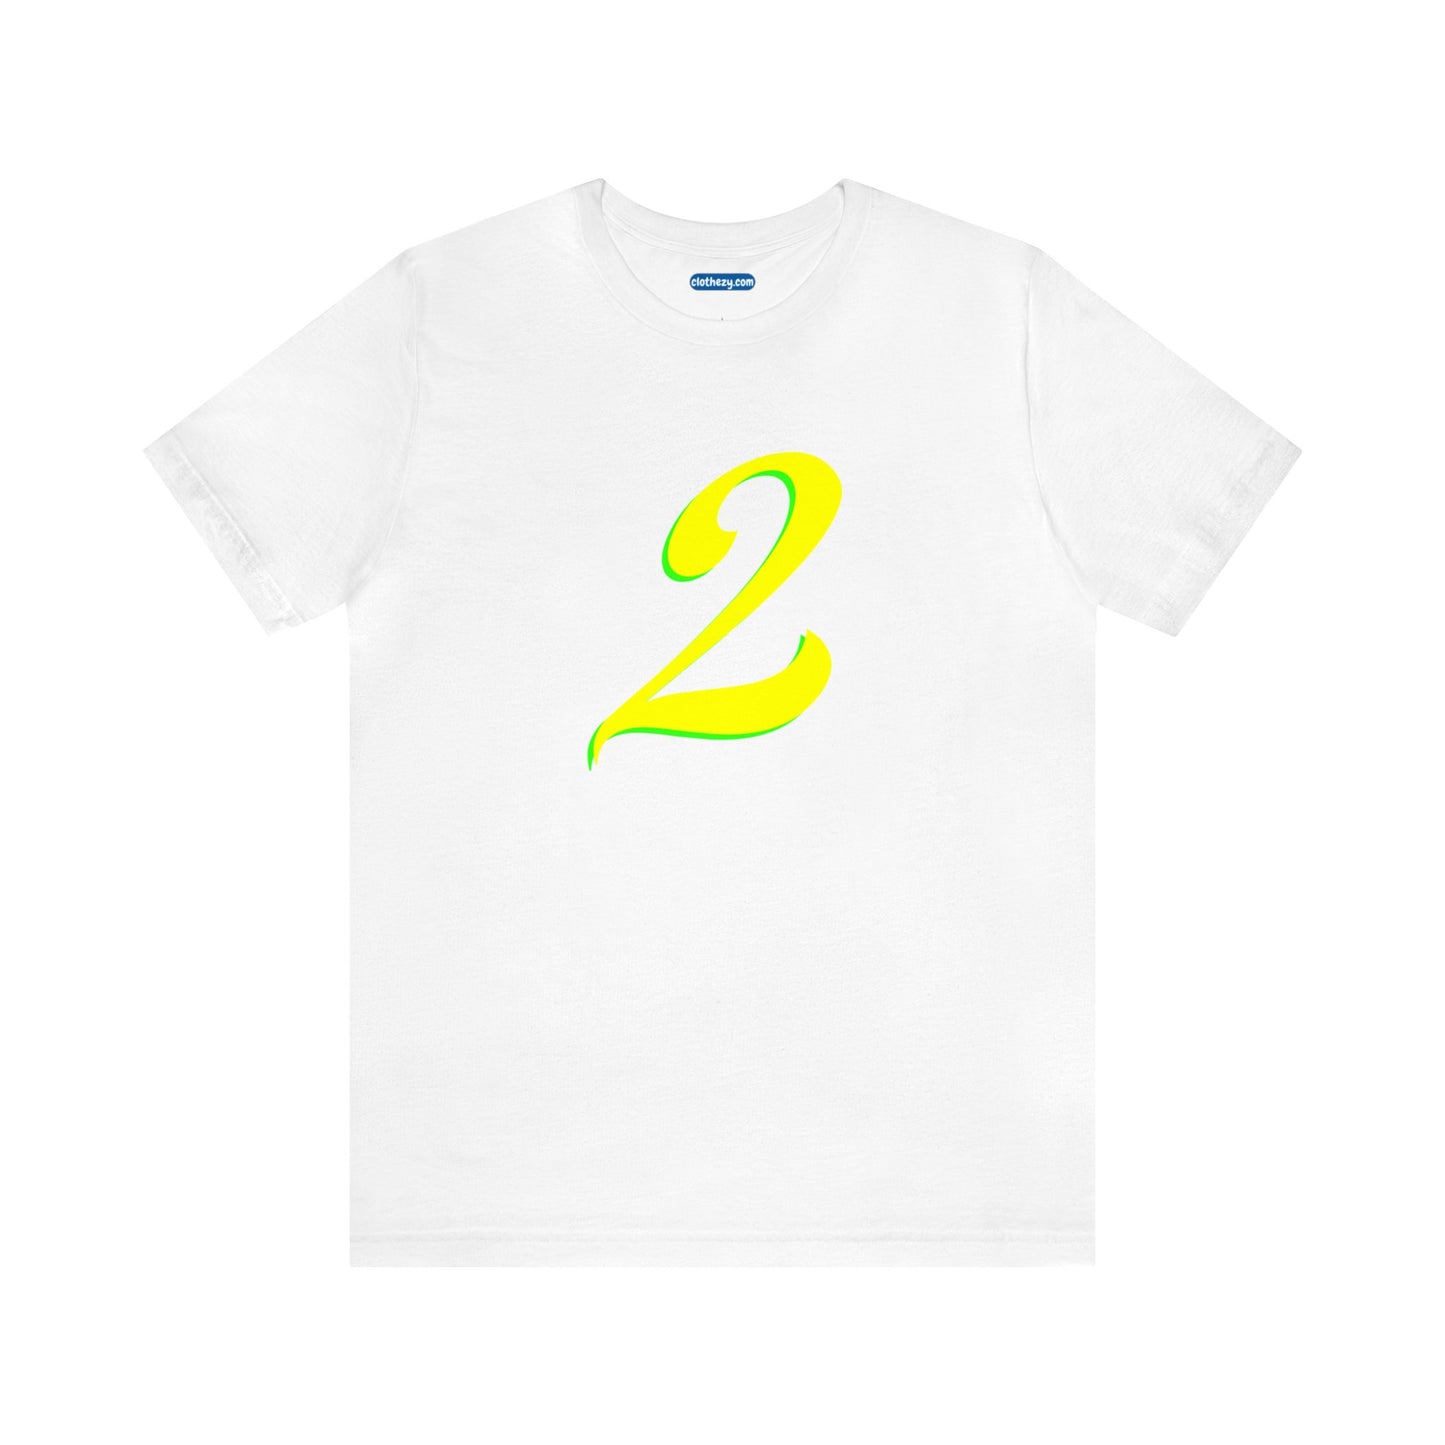 Number 2 Design - Soft Cotton Tee for birthdays and celebrations, Gift for friends and family, Multiple Options by clothezy.com in Asphalt Size Small - Buy Now